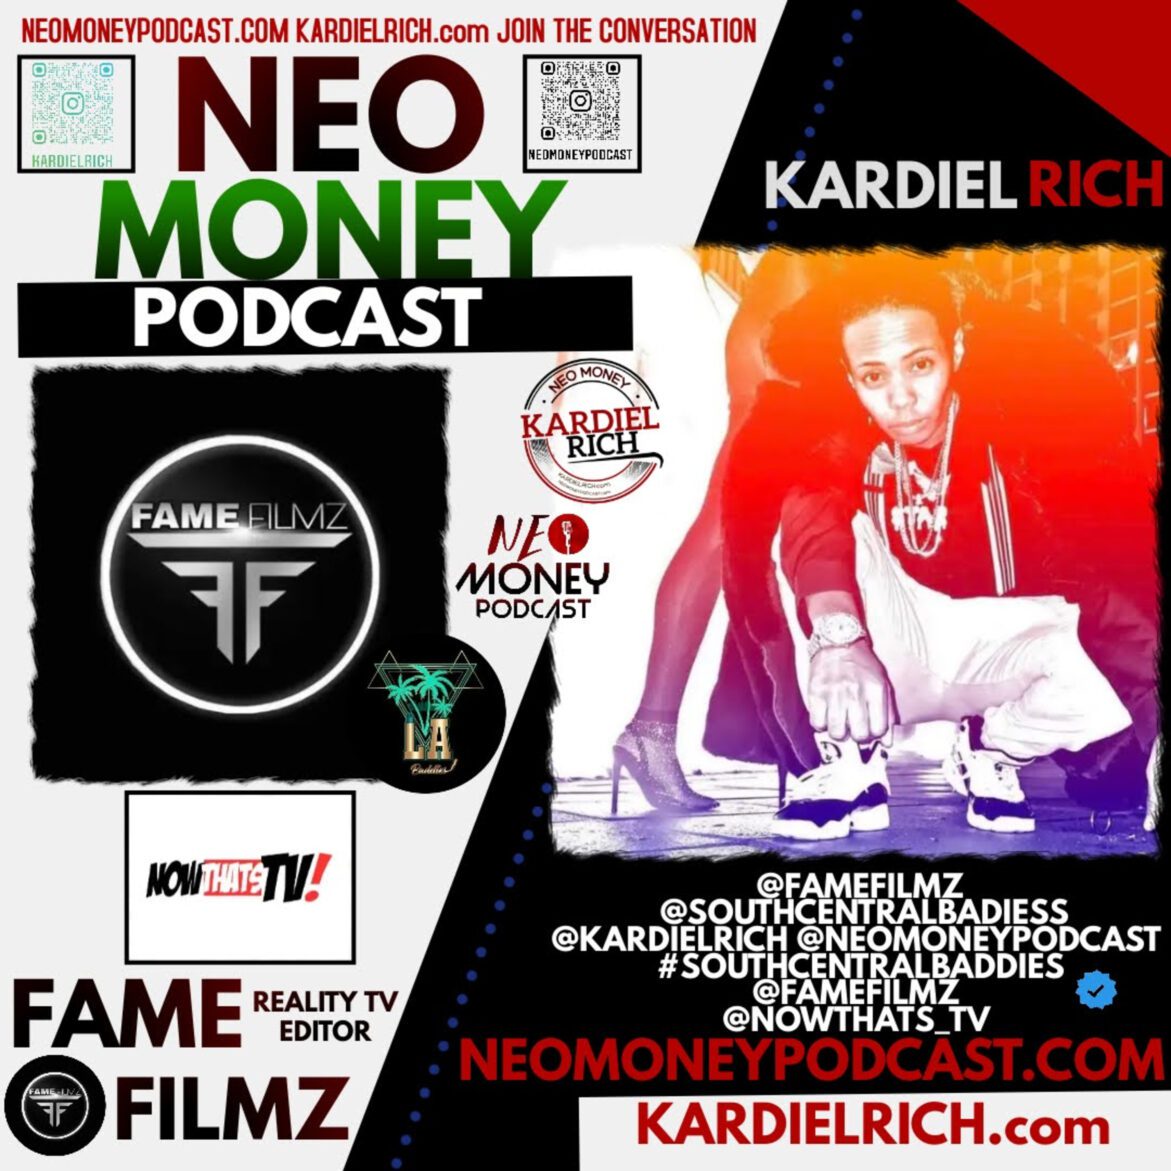 Black Podcasting - SOUTH CENTRAL BADDIES ON NOW THATS TV BEHIND THE SCENES 📺🎥KARDIEL RICH CHOPS IT UP WITH FAME FILMZ